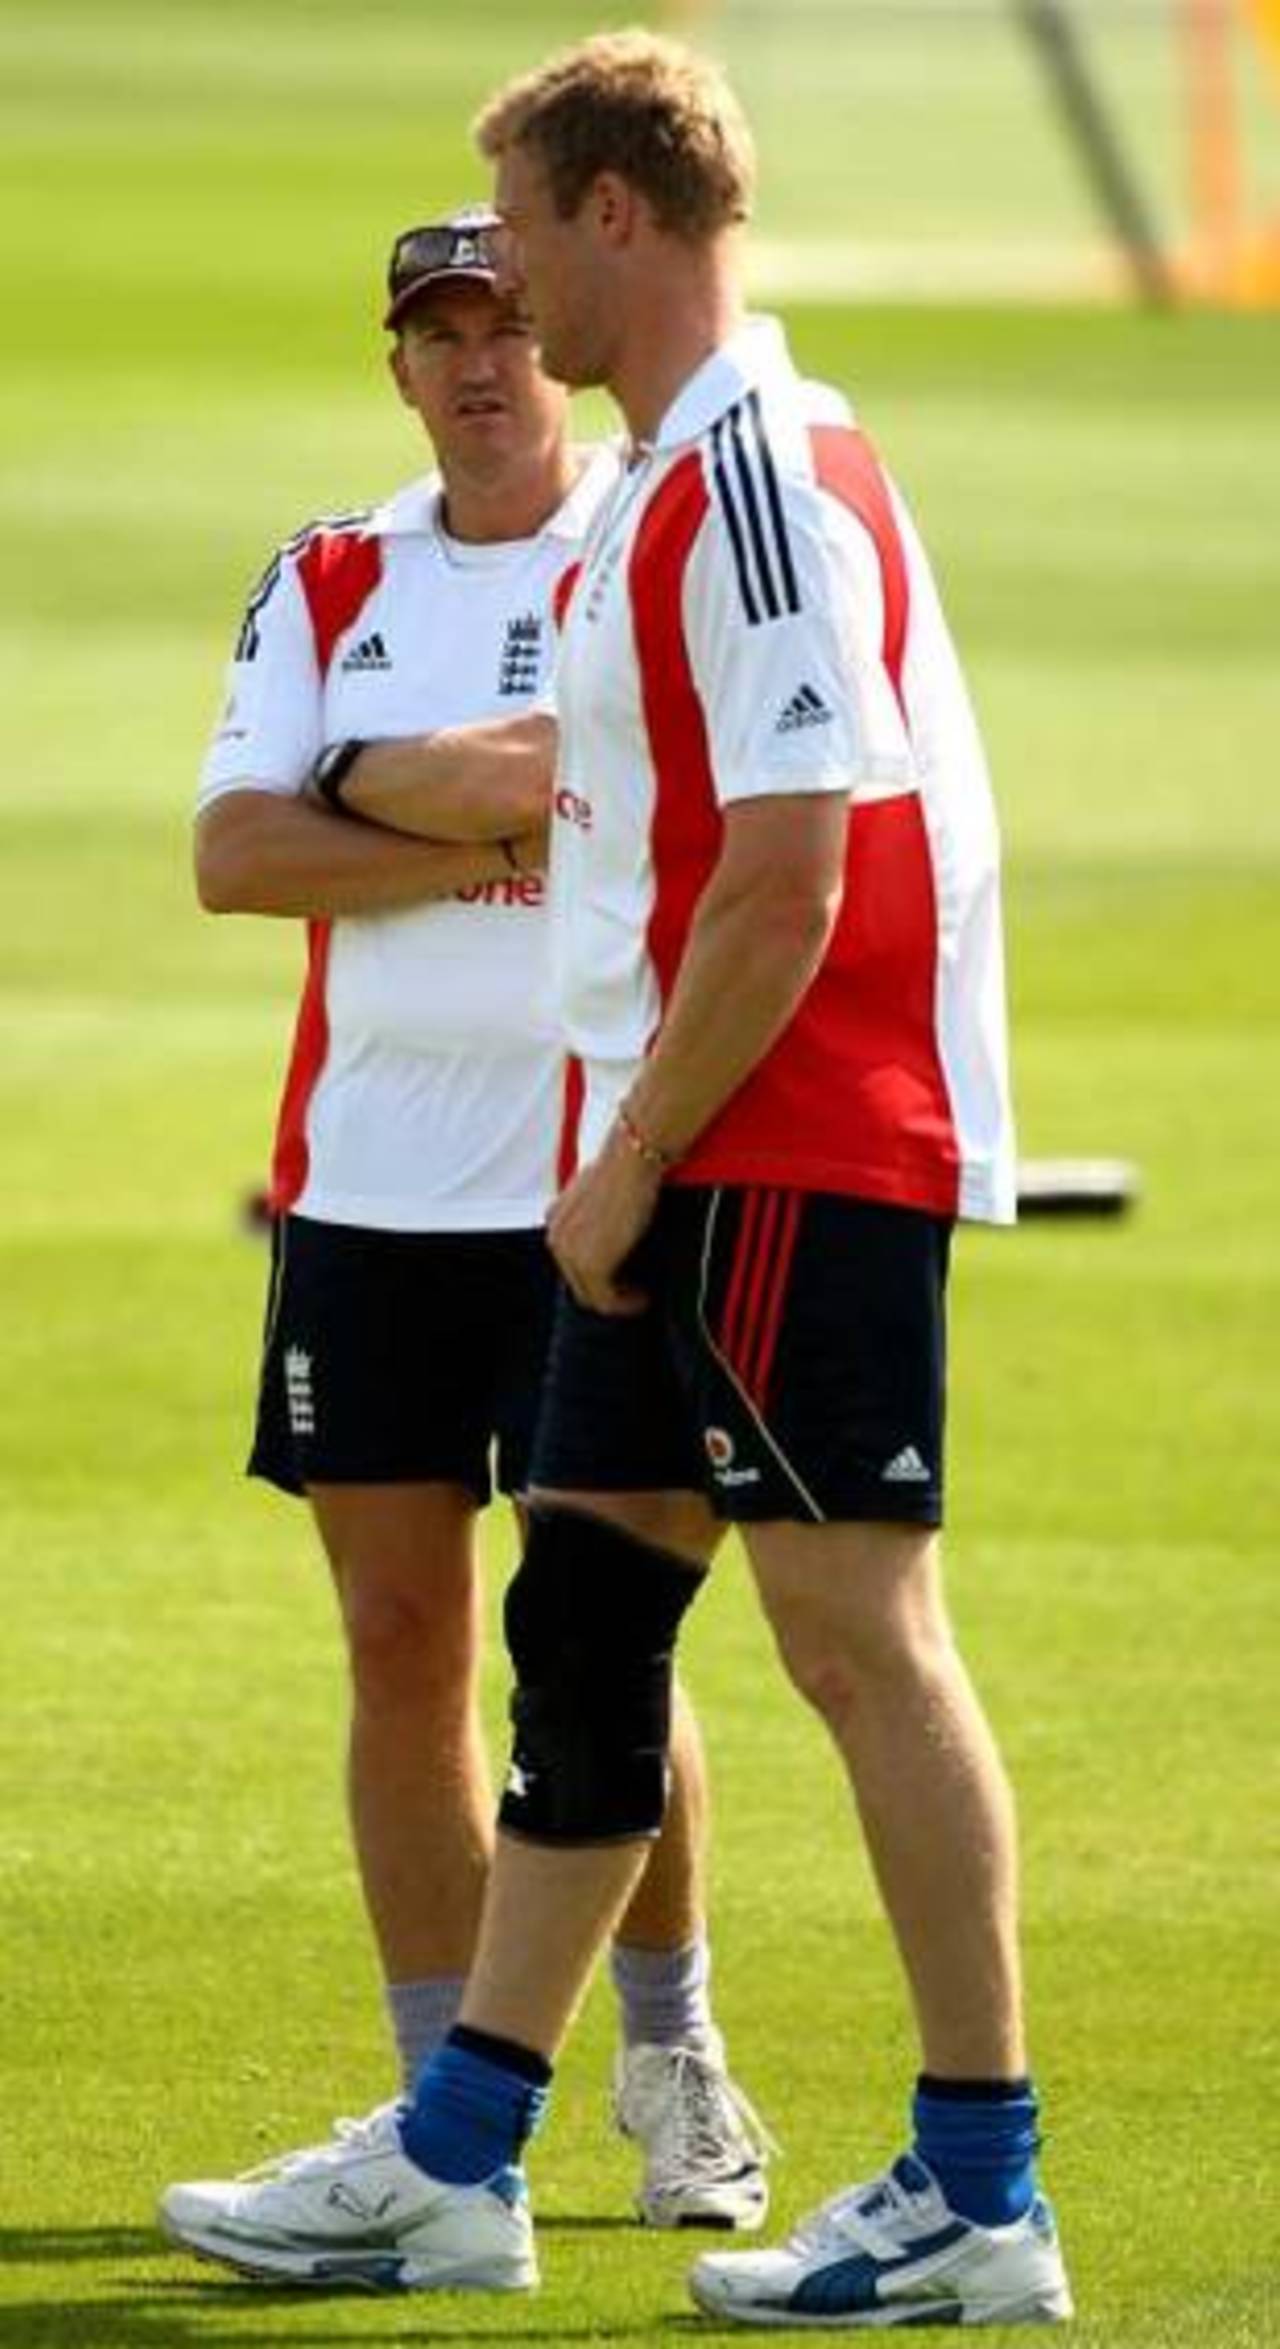 Andy Flower chats with Andrew Flintoff during training, Headingley, August 6, 2009